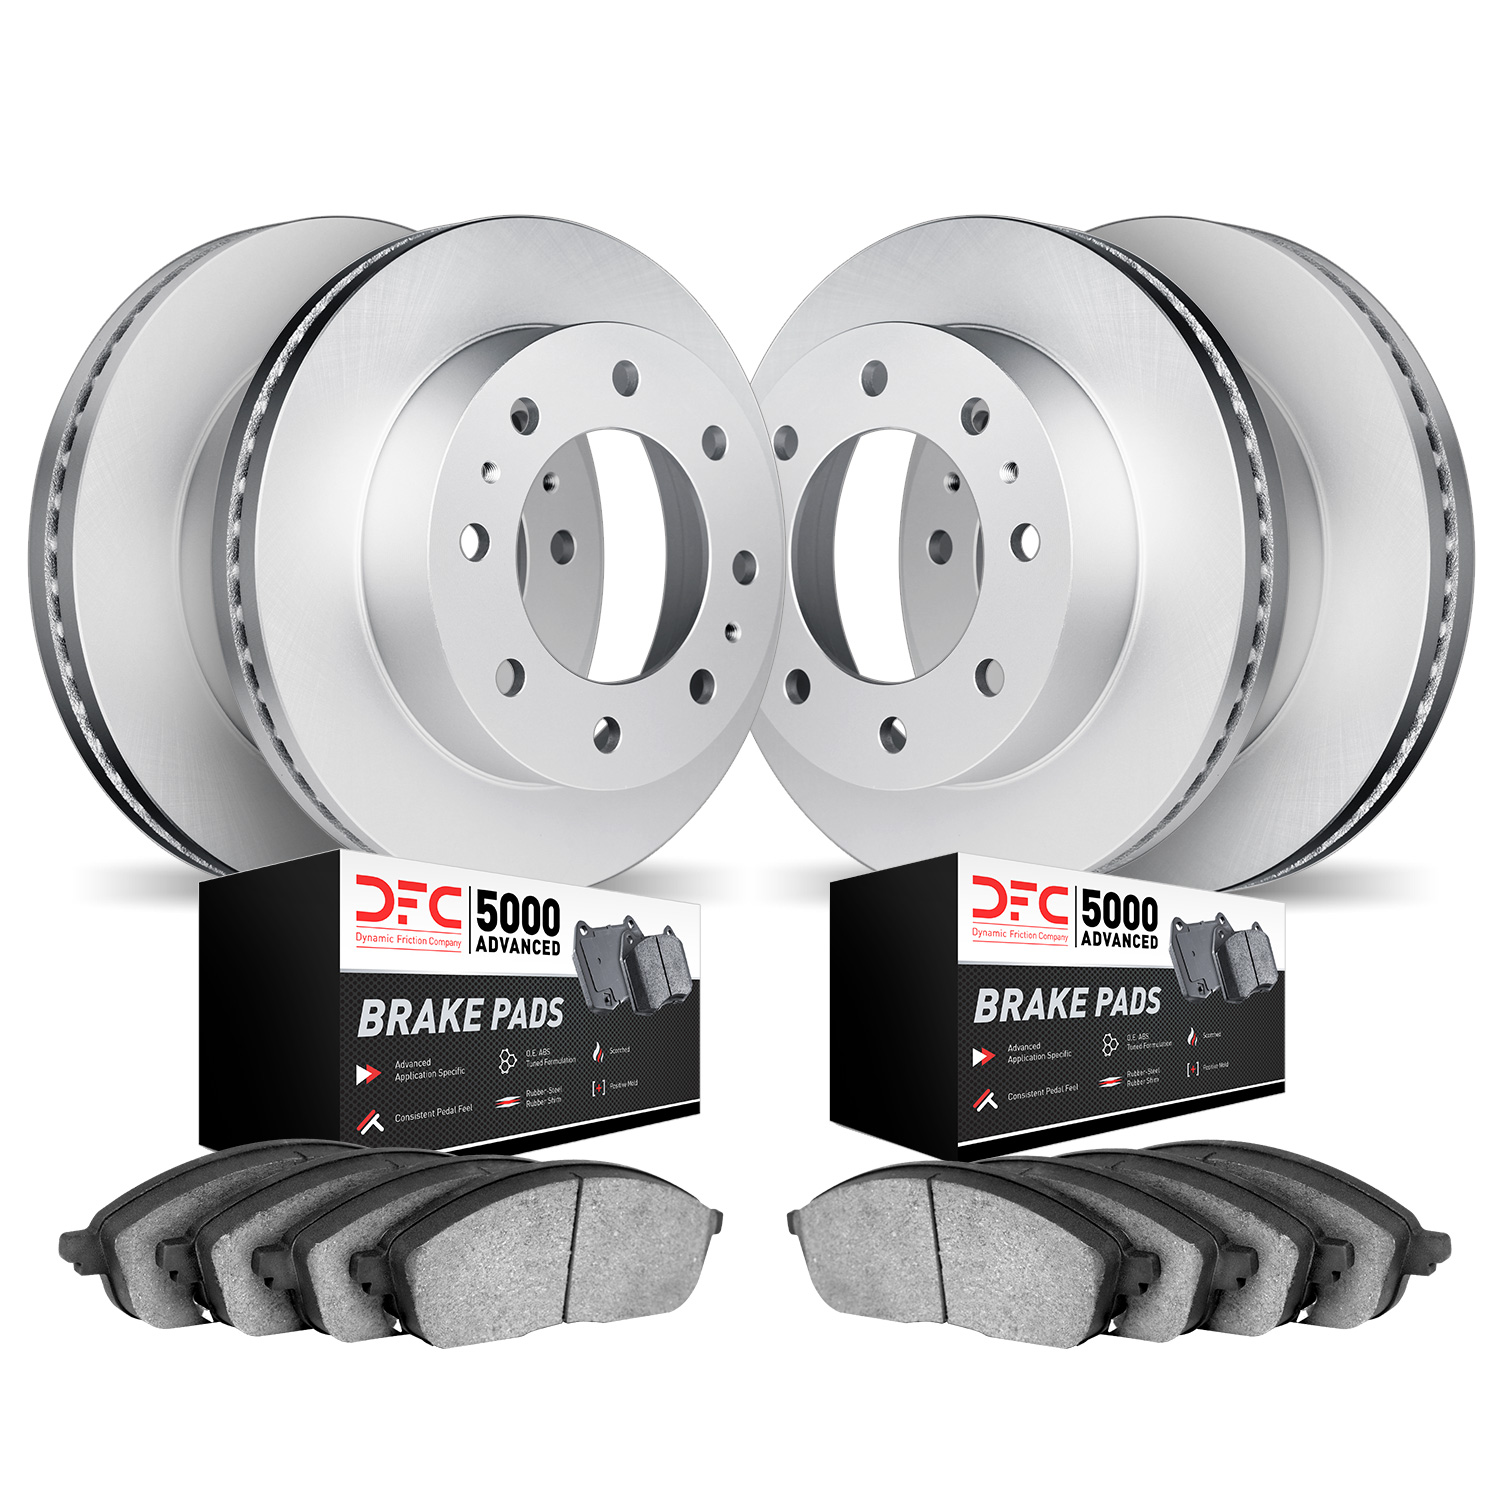 4504-54066 Geospec Brake Rotors w/5000 Advanced Brake Pads Kit, Fits Select Ford/Lincoln/Mercury/Mazda, Position: Front and Rear